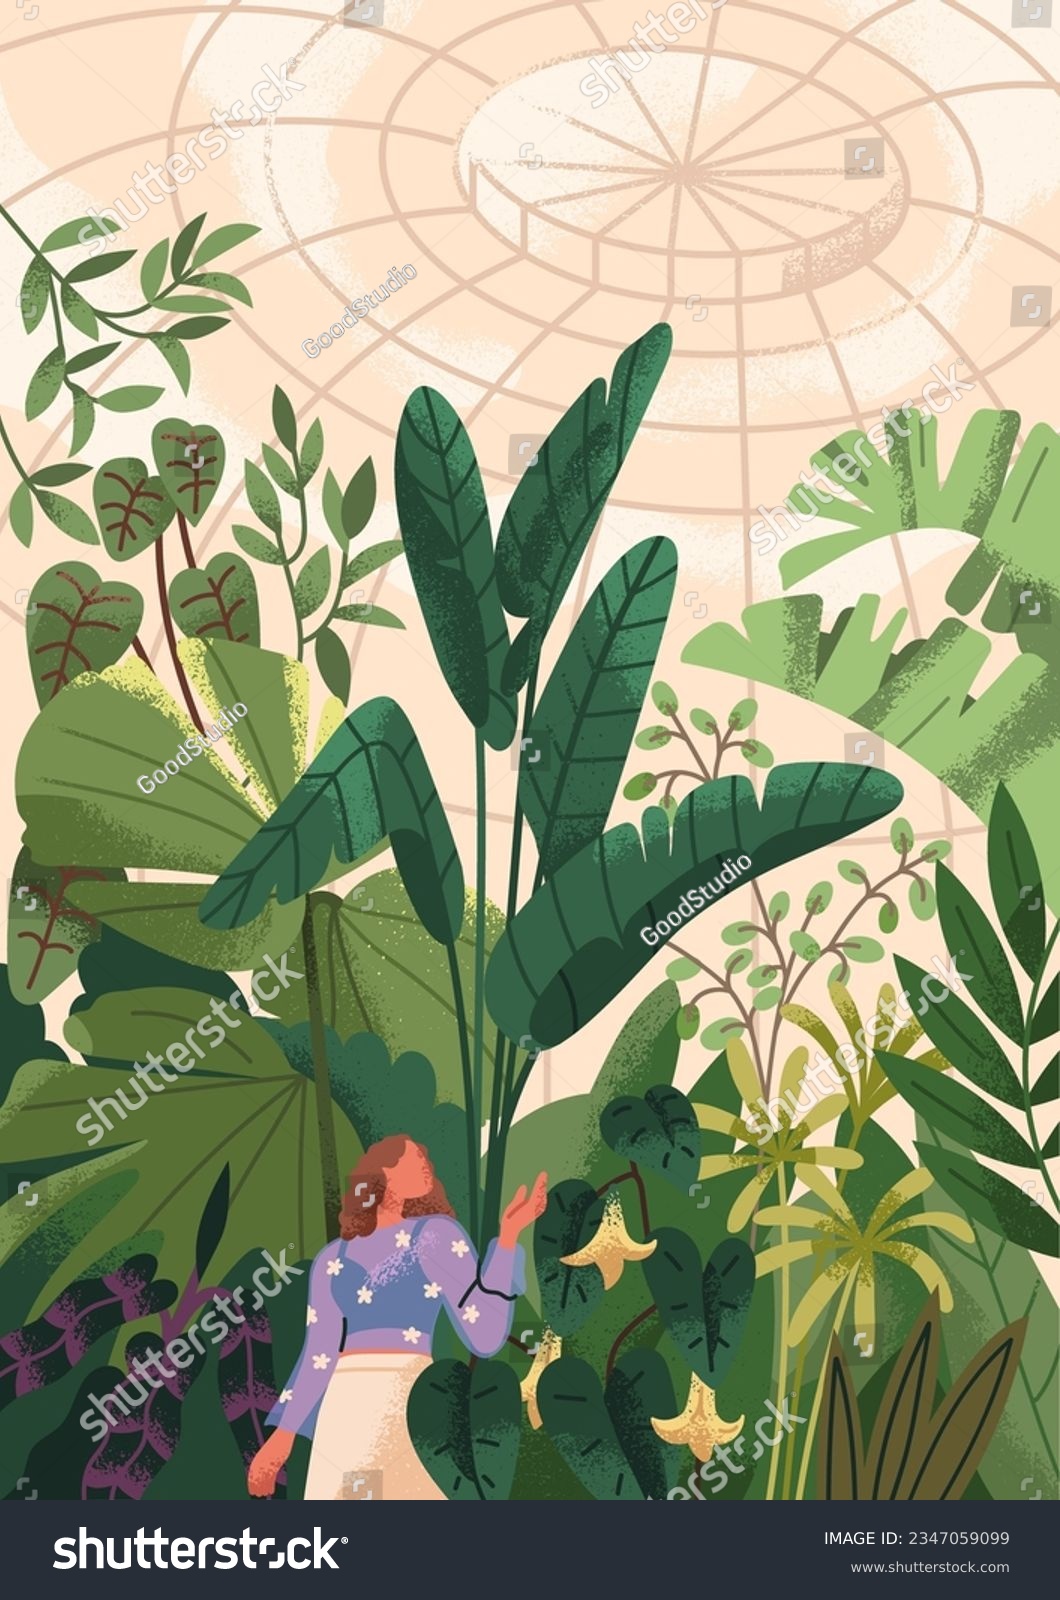 SVG of Greenhouse, conservatory. Woman walking in botanical garden, park among green plants under dome roof. Person and nature in glasshouse, orangery with growing leaf vegetations. Flat vector illustration svg